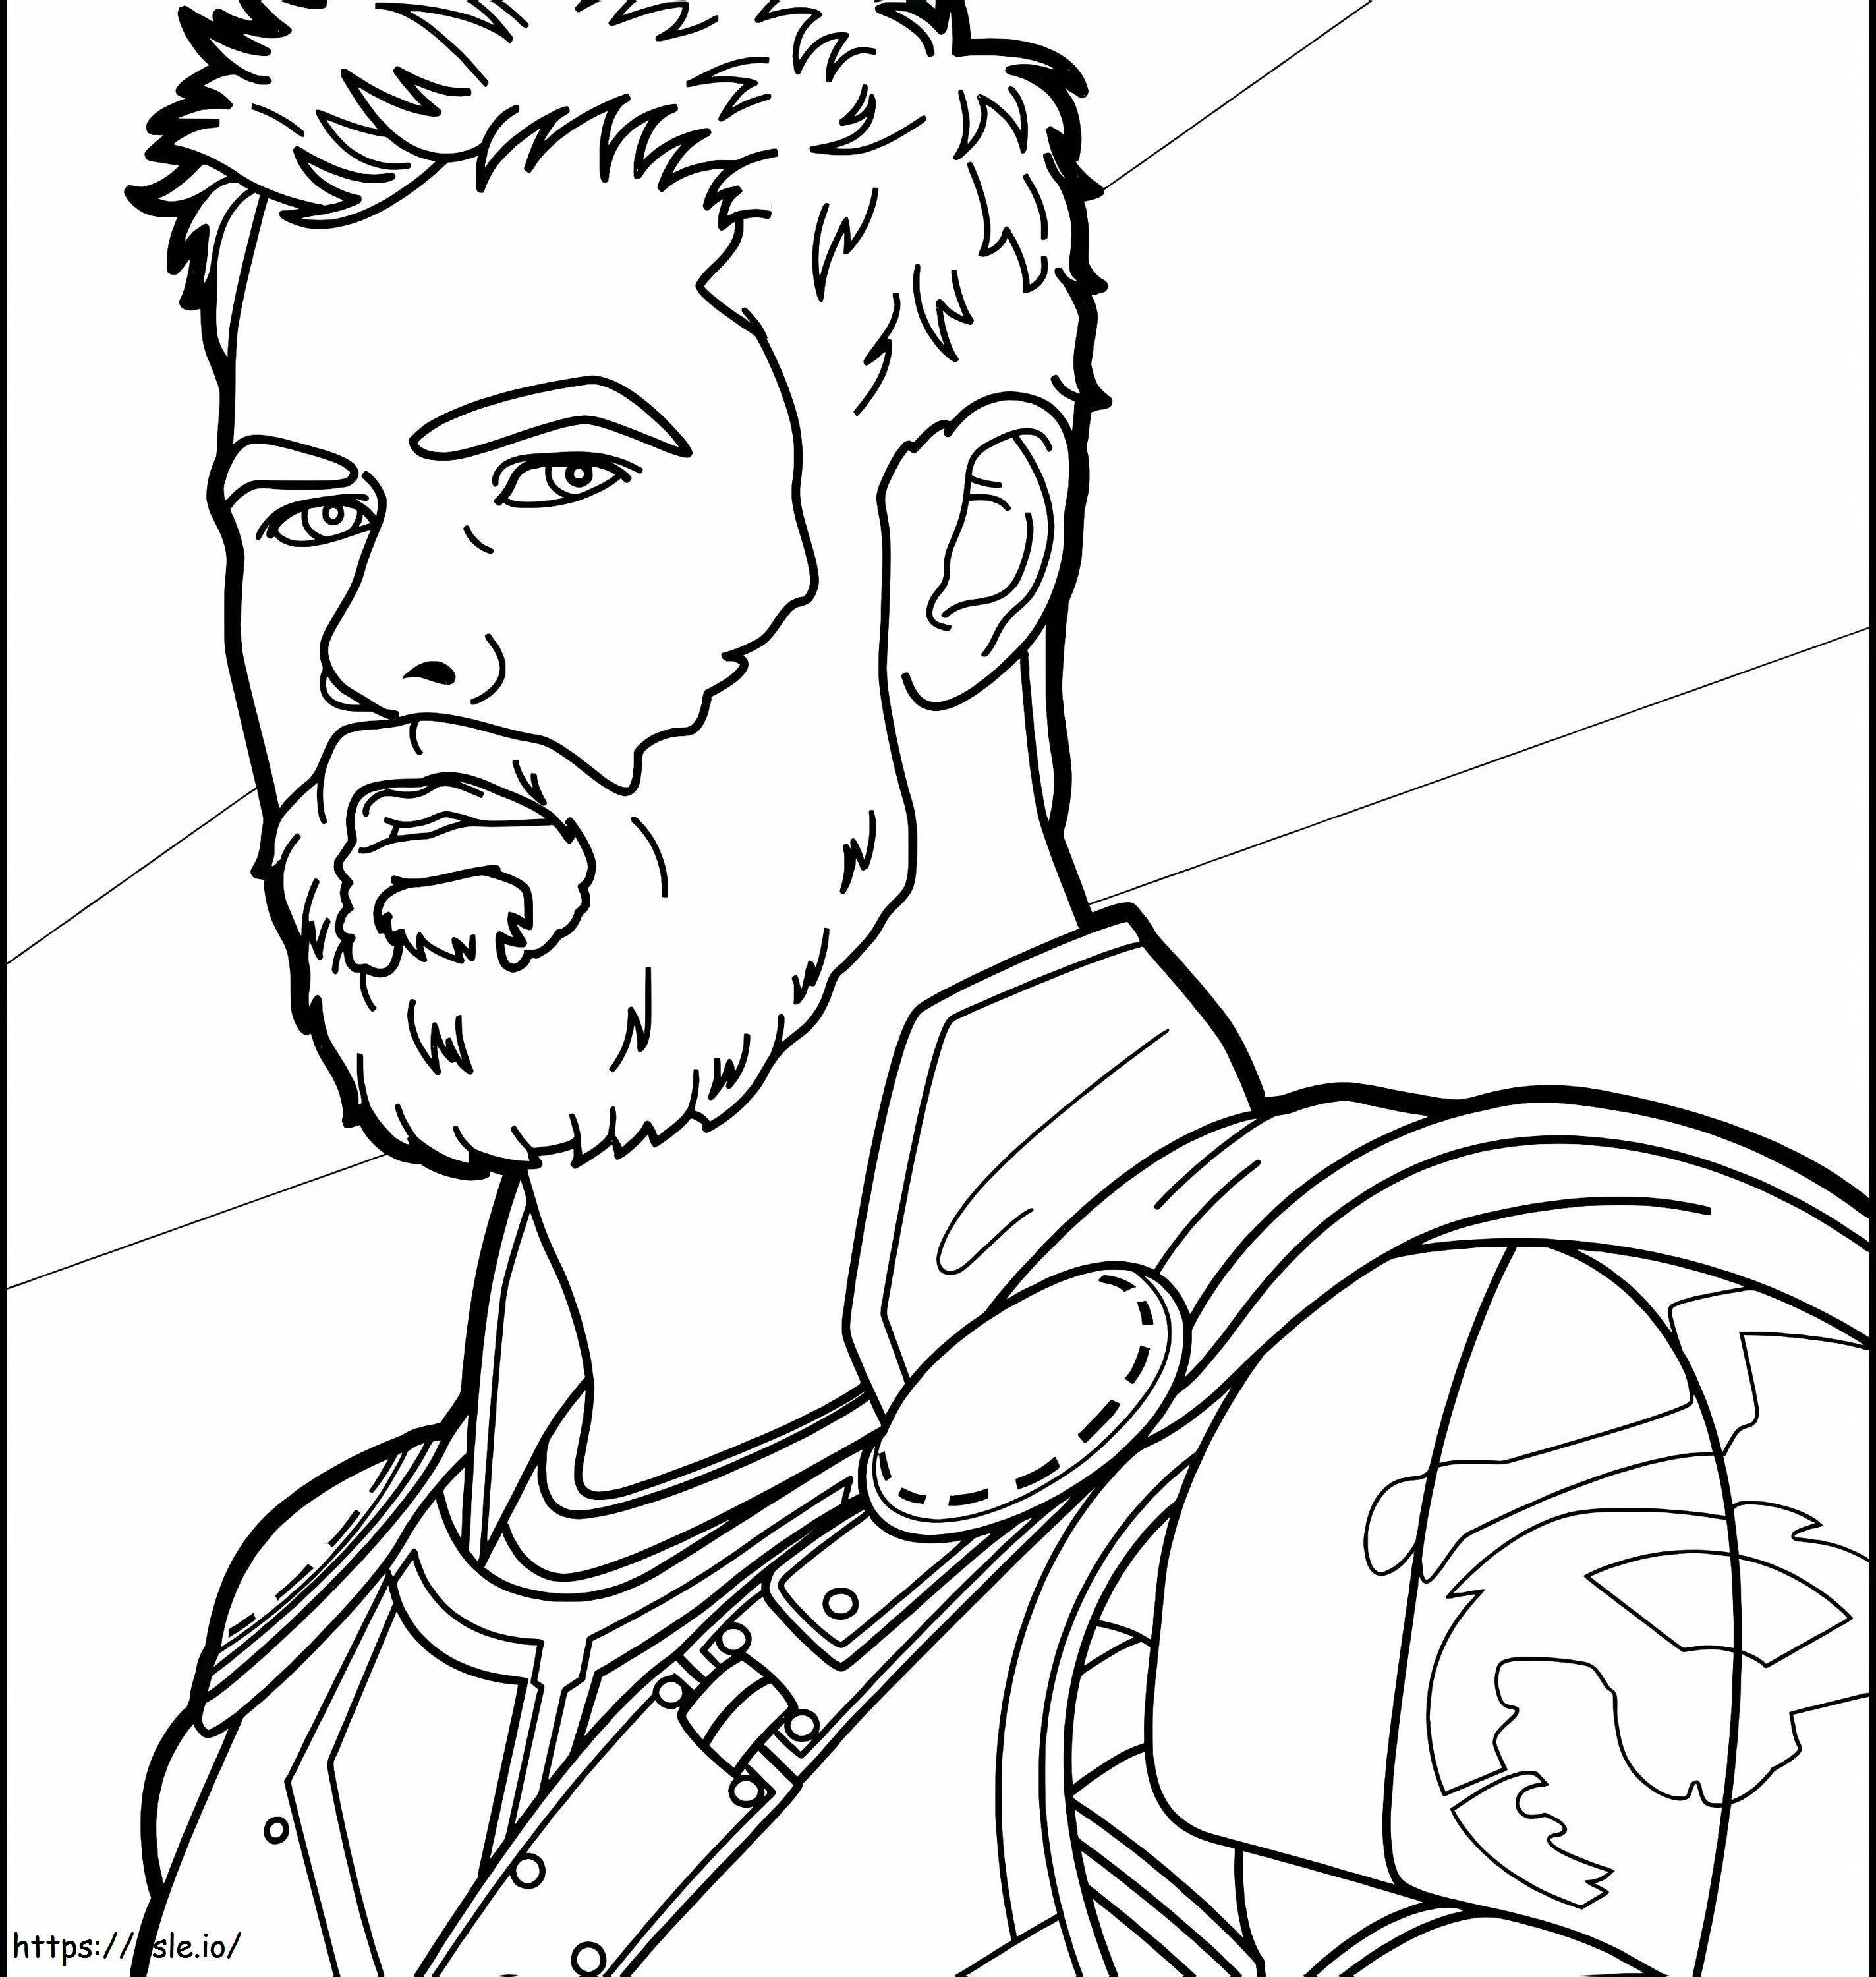 Cartoon Avengers Thor coloring page